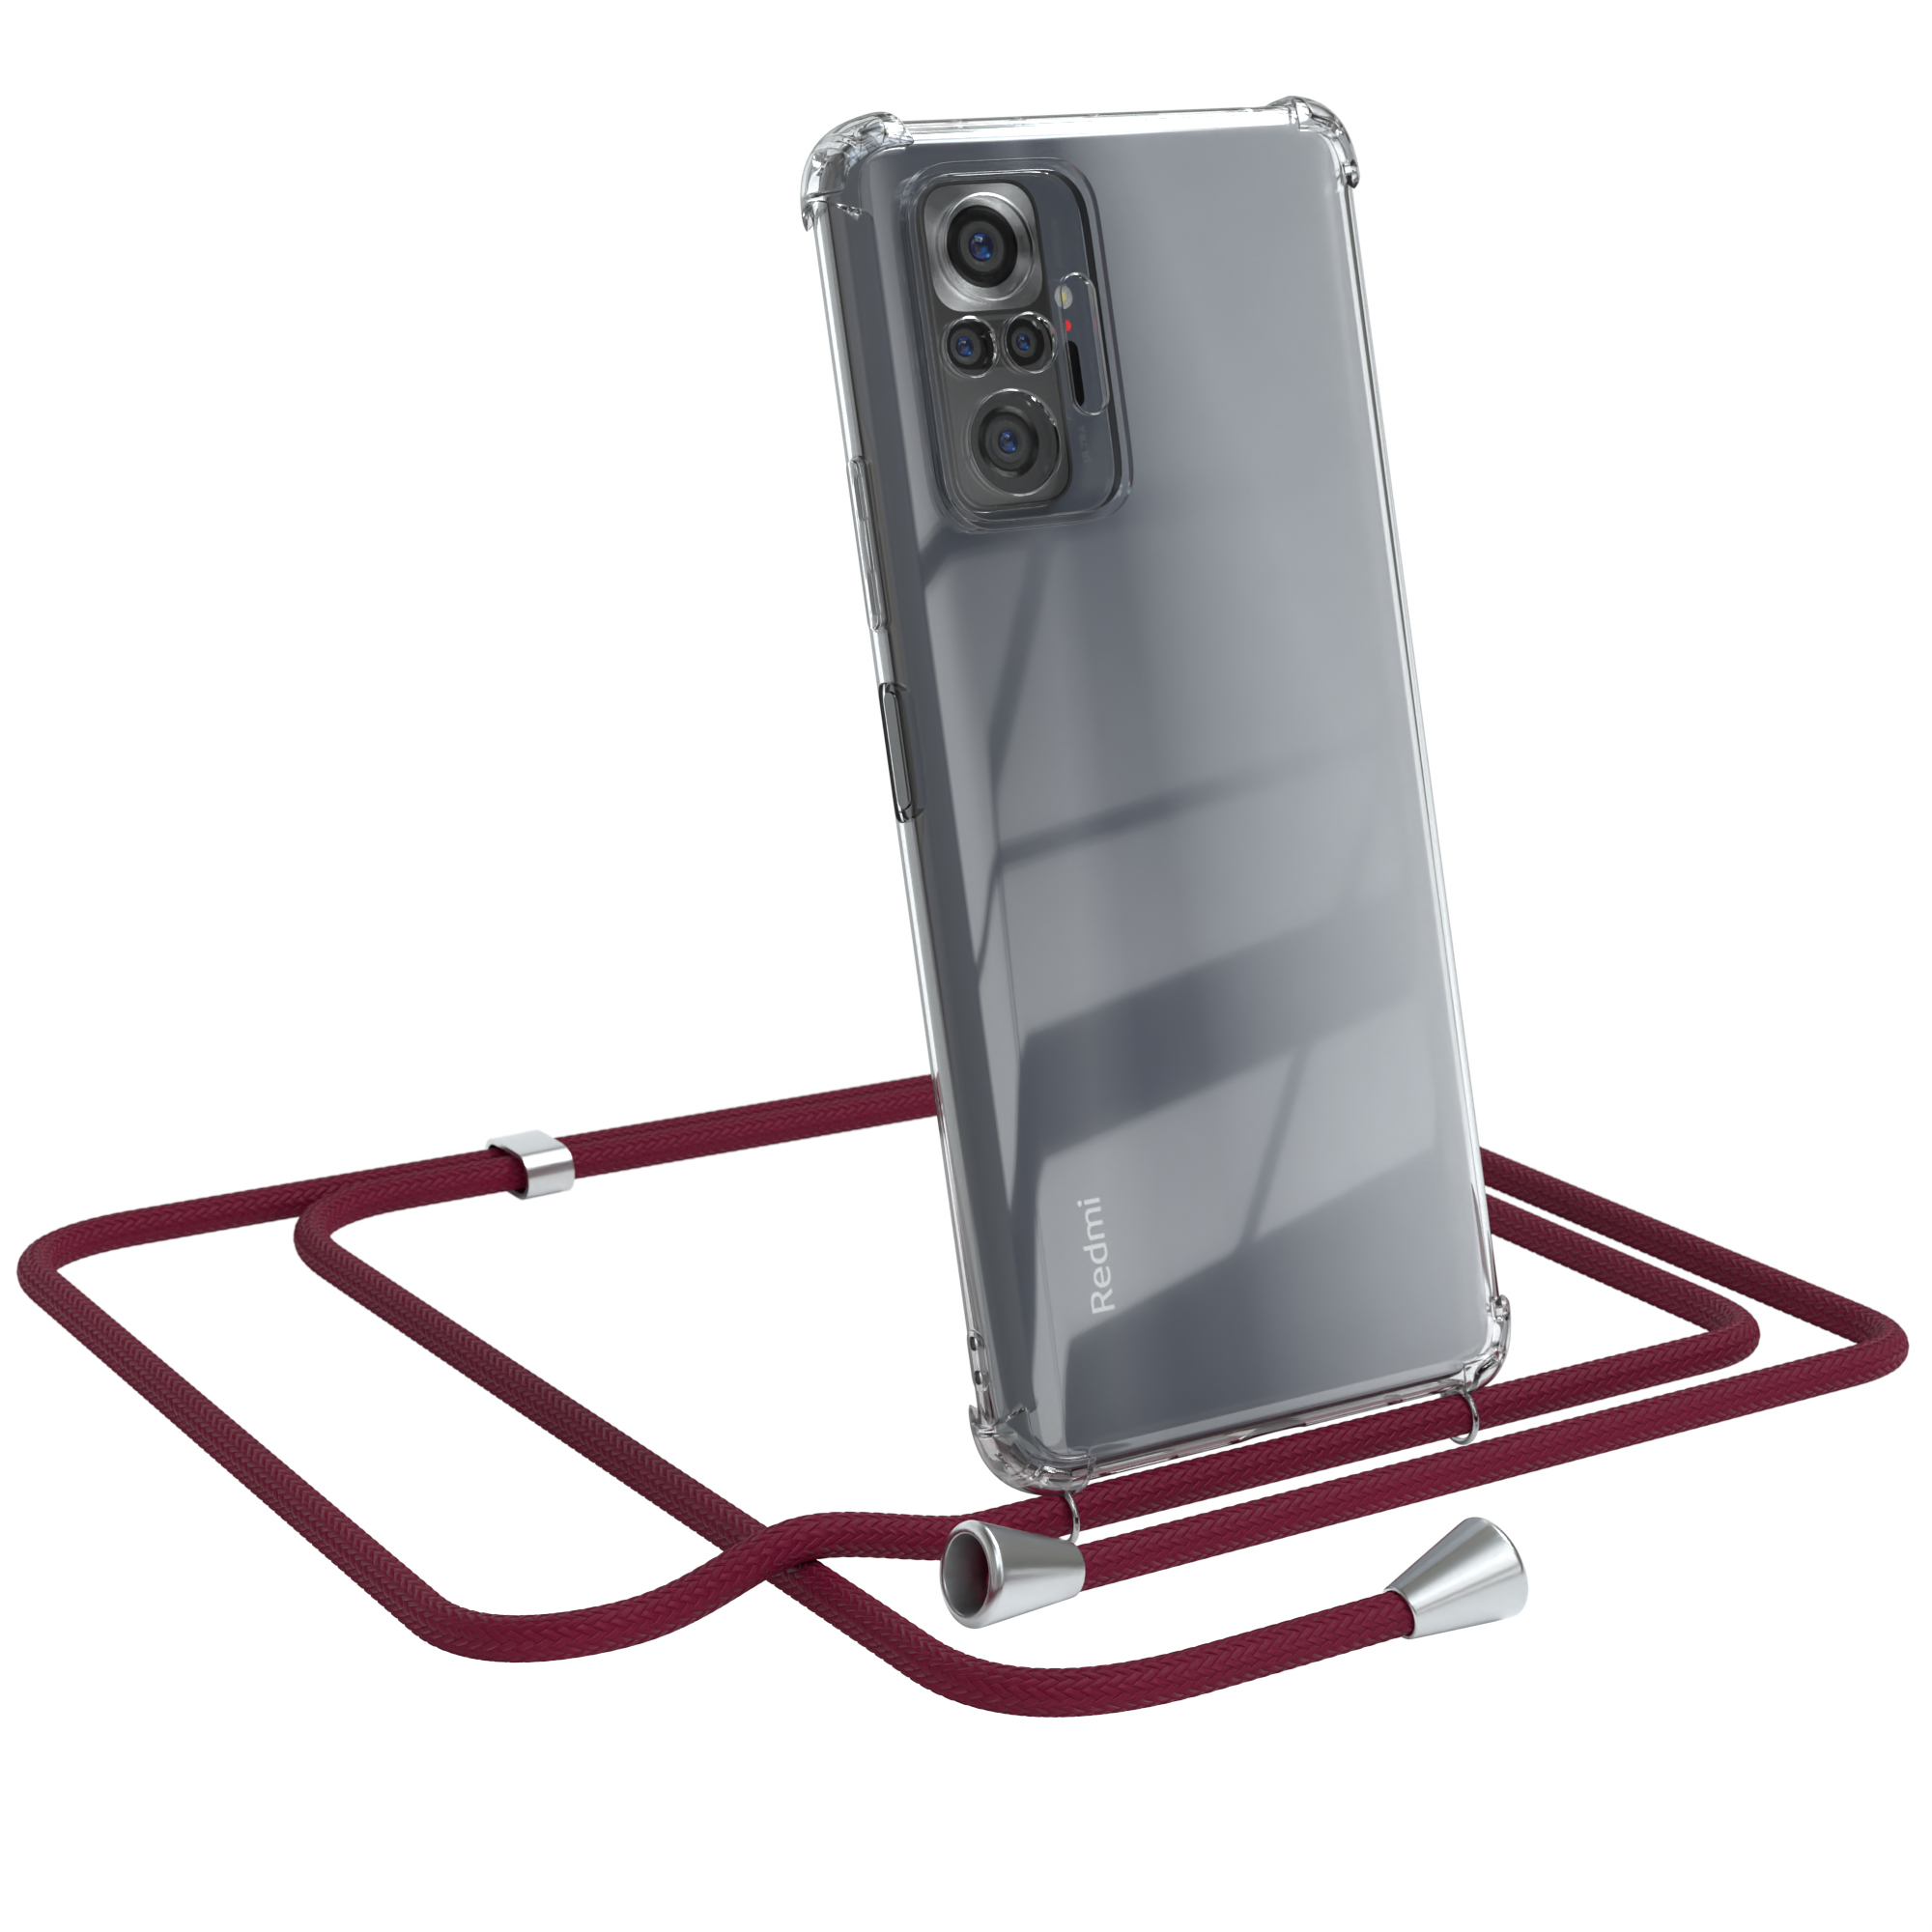 Clips 10 Xiaomi, mit Cover / CASE EAZY Bordeaux Pro, Note Rot Umhängeband, Redmi Silber Umhängetasche, Clear